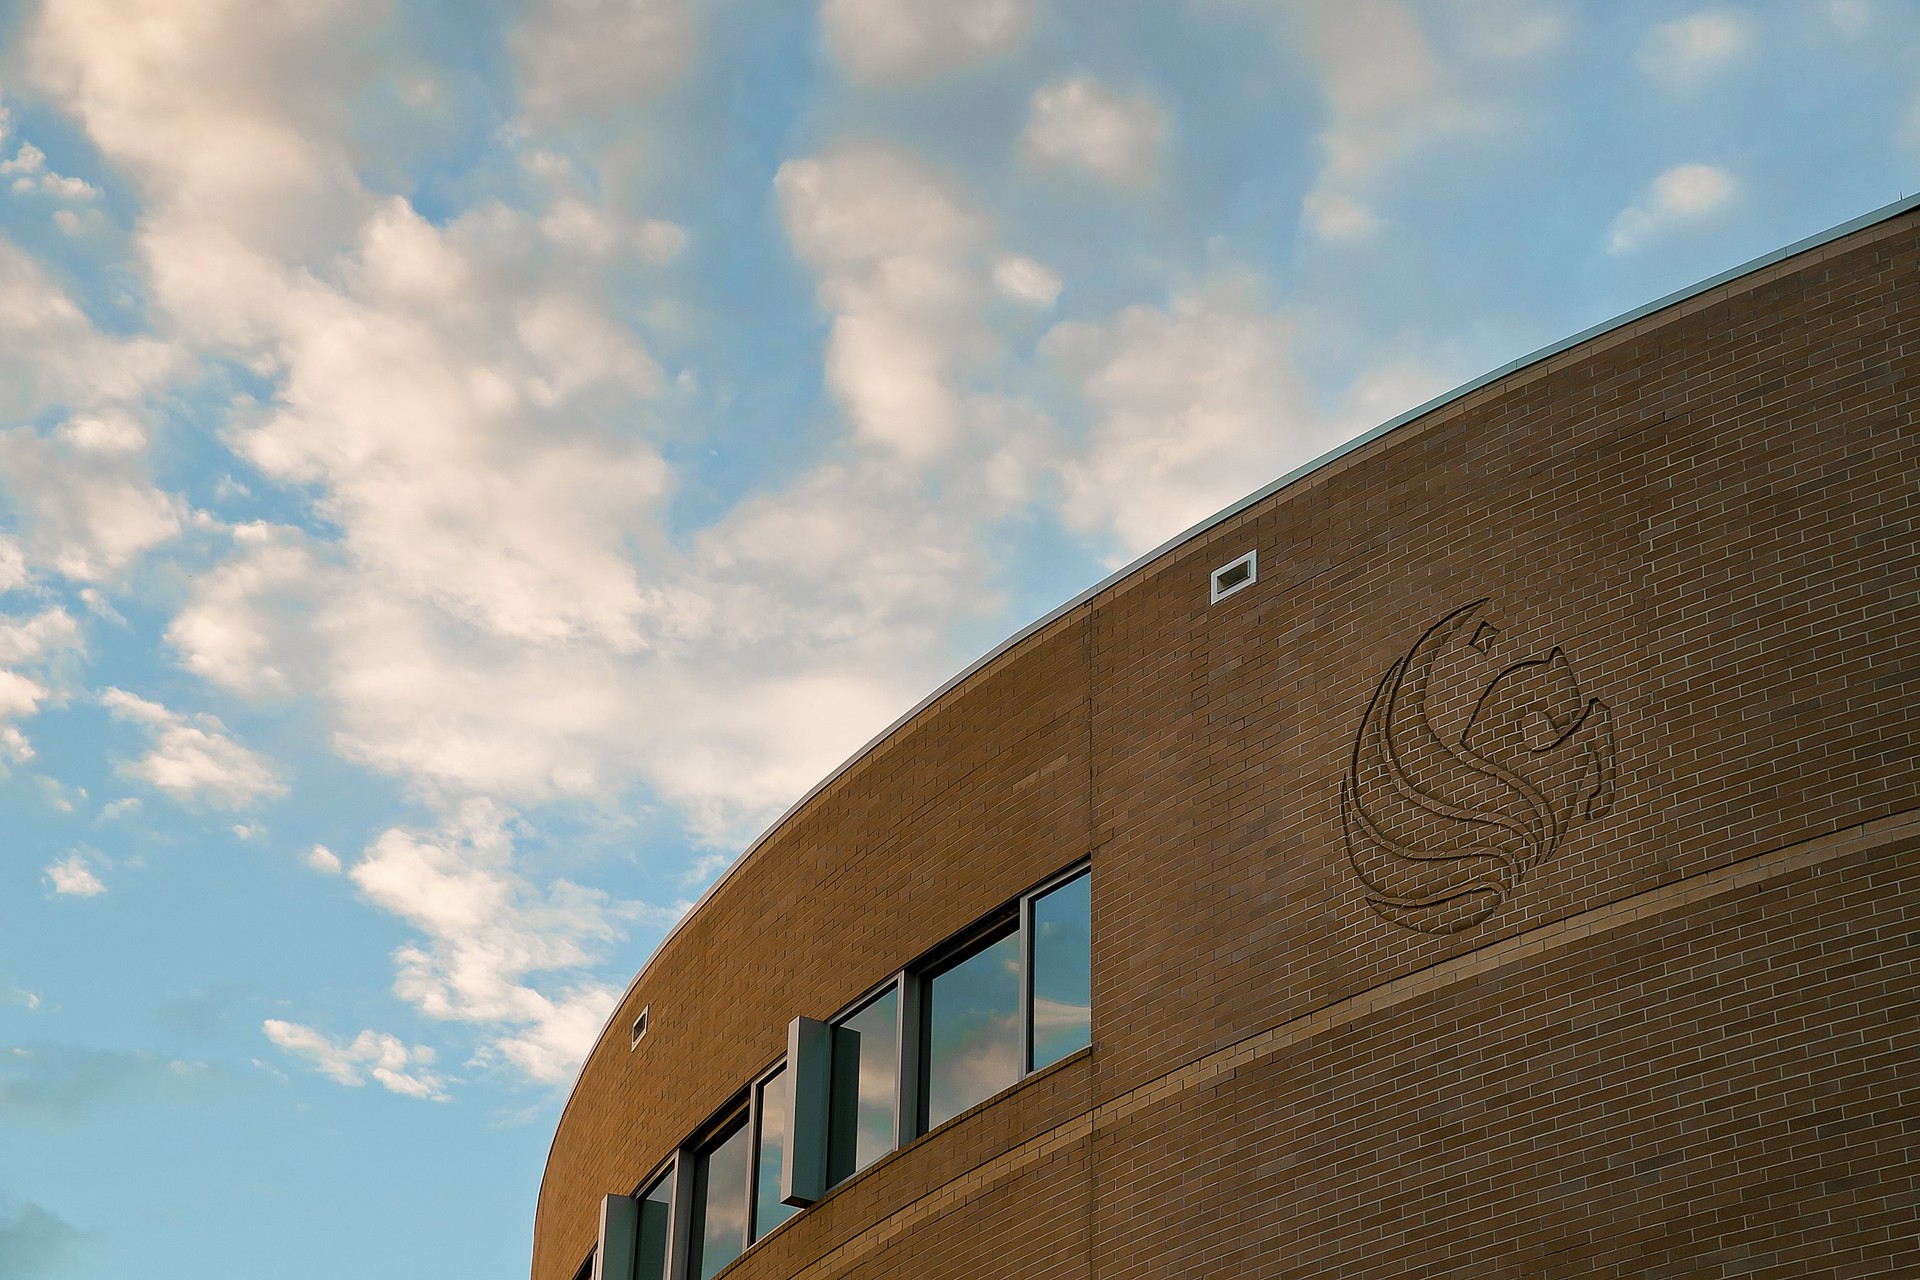 Up close image of the UCF logo on a campus building